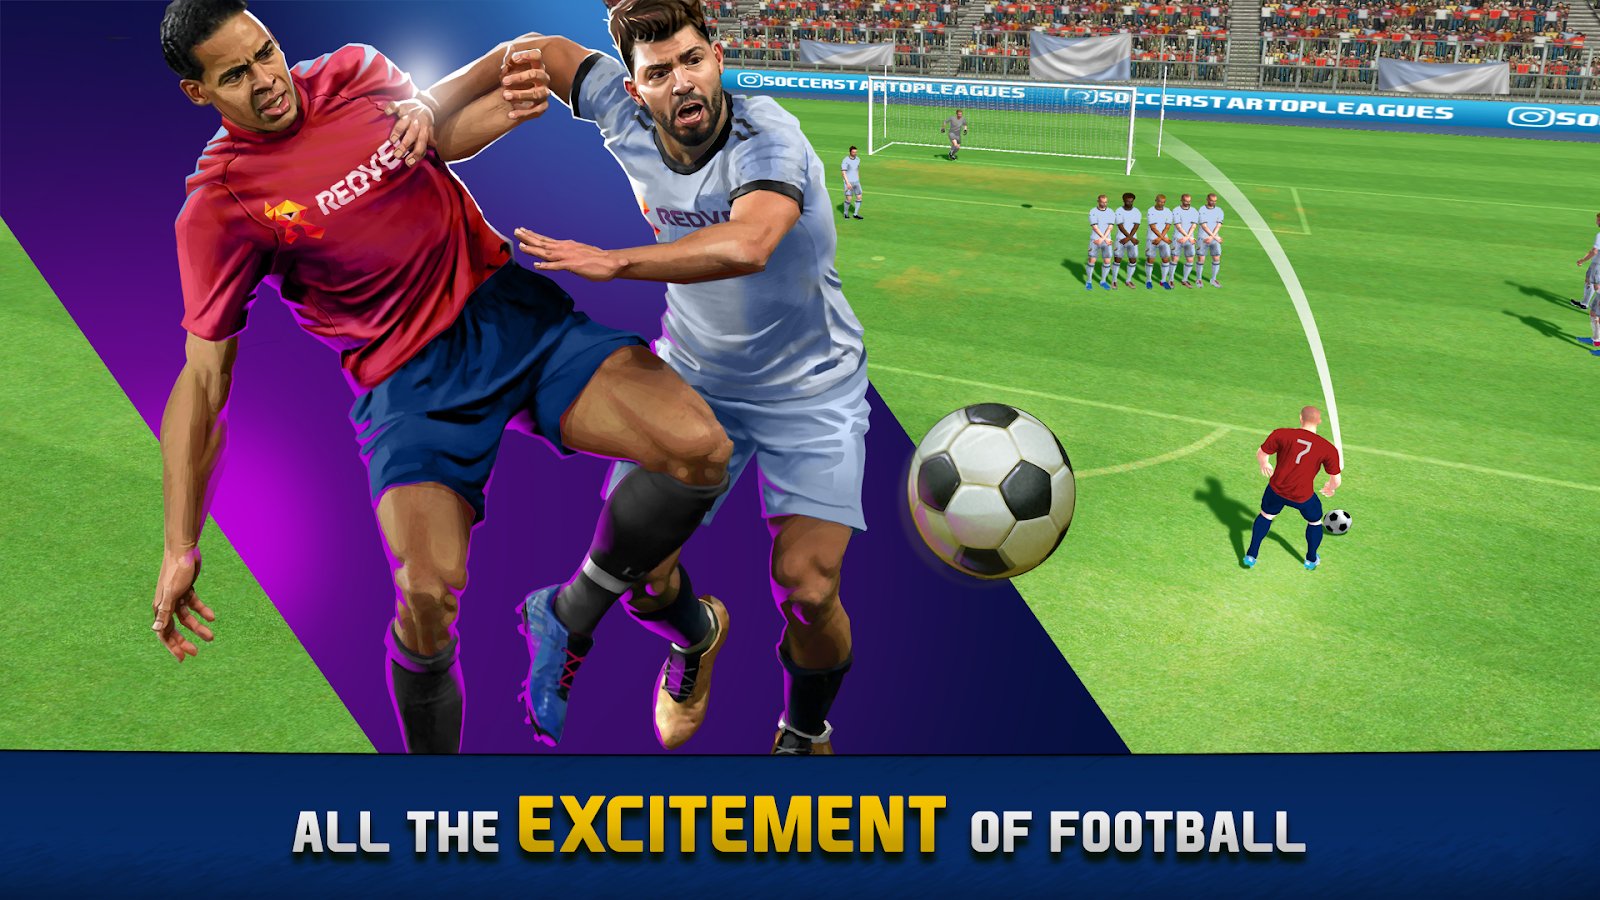 Soccer Star 2018 Top Leagues v2.1.8 APK for Android